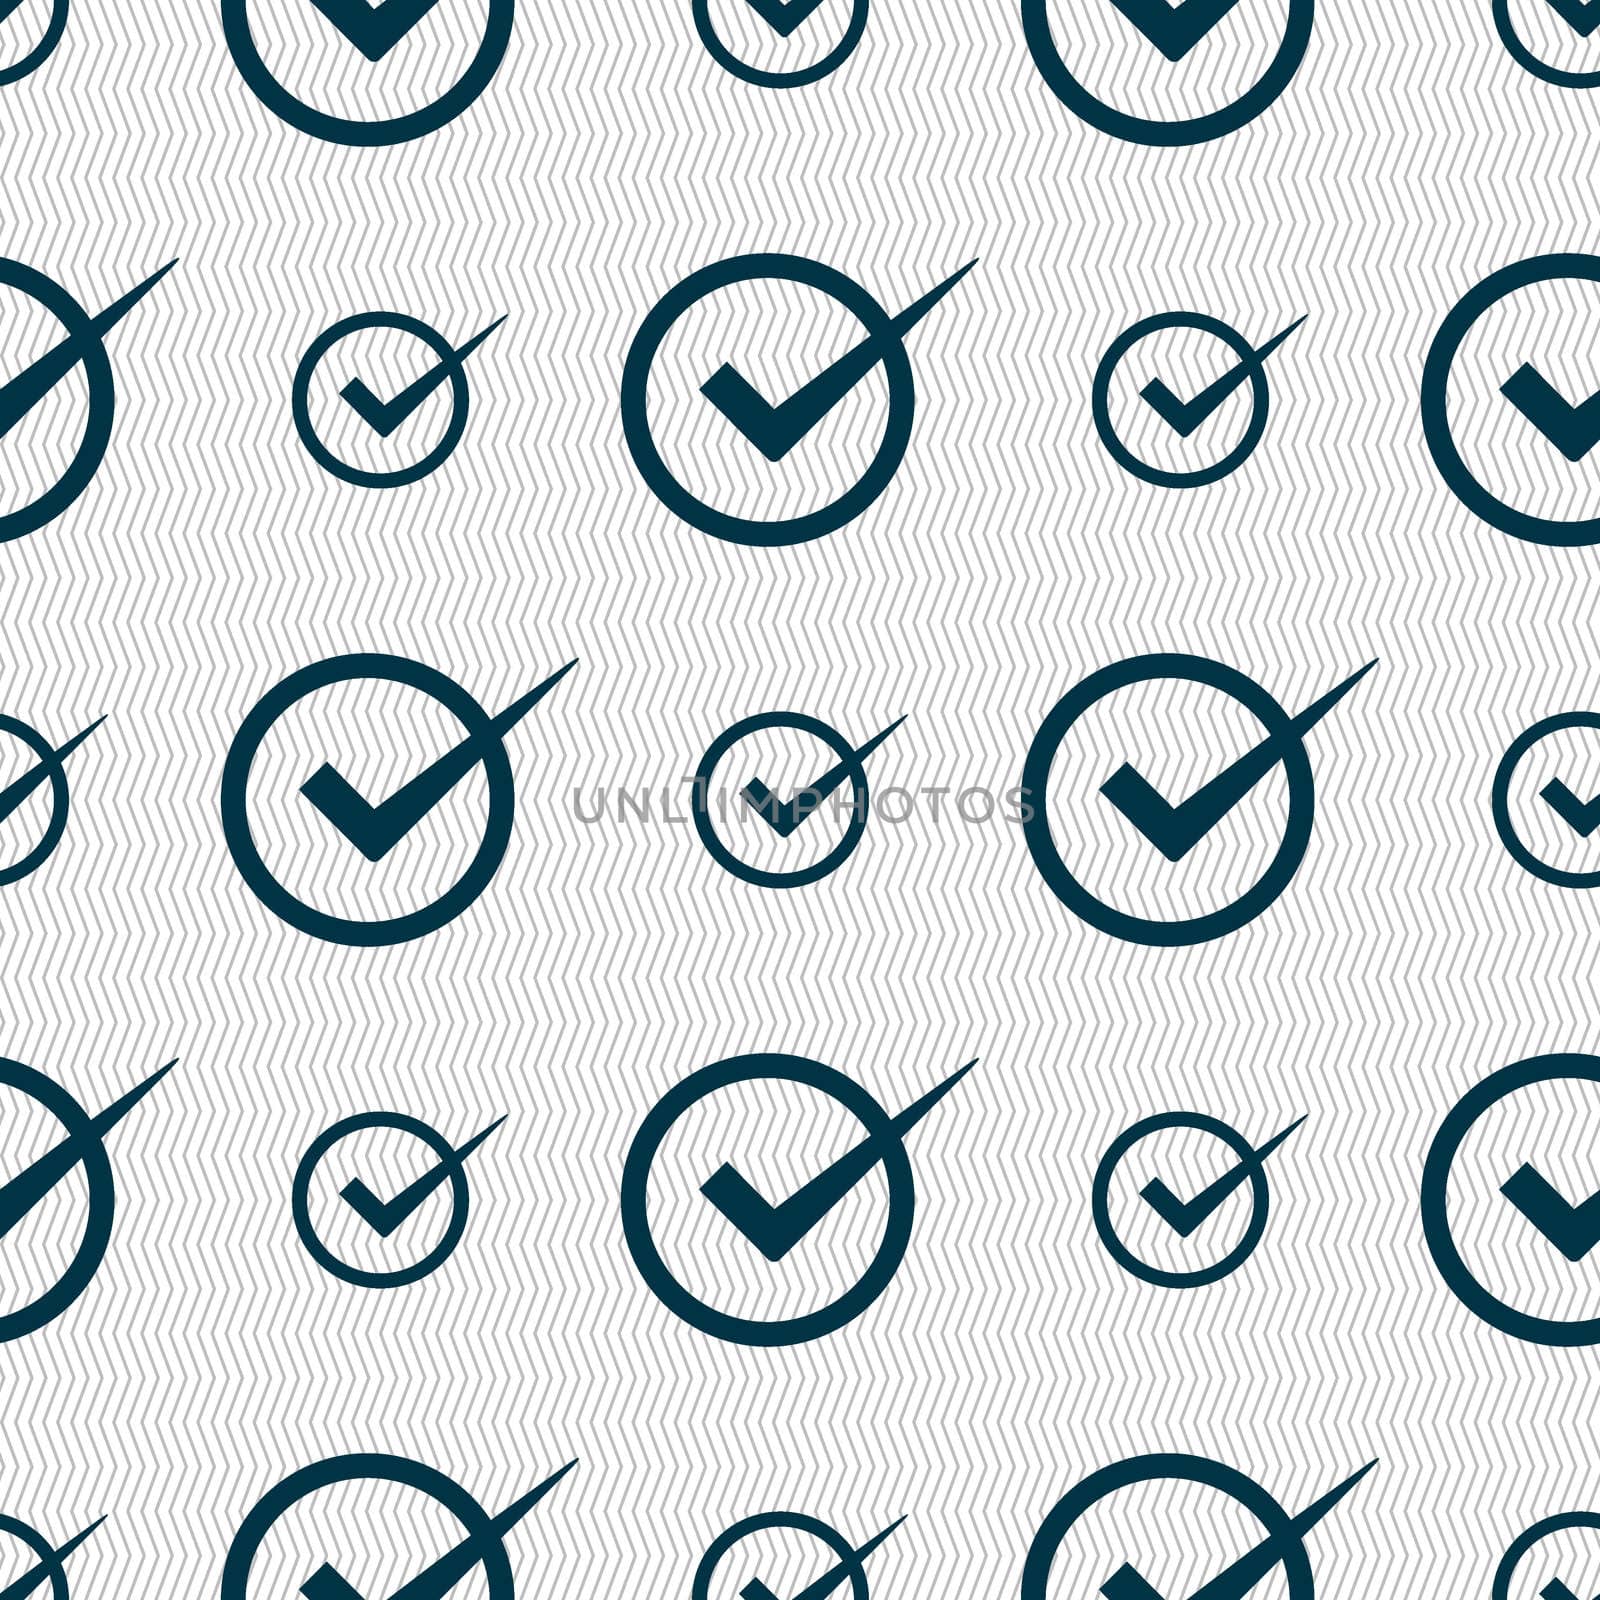 Check mark sign icon. Checkbox button. Seamless abstract background with geometric shapes. illustration